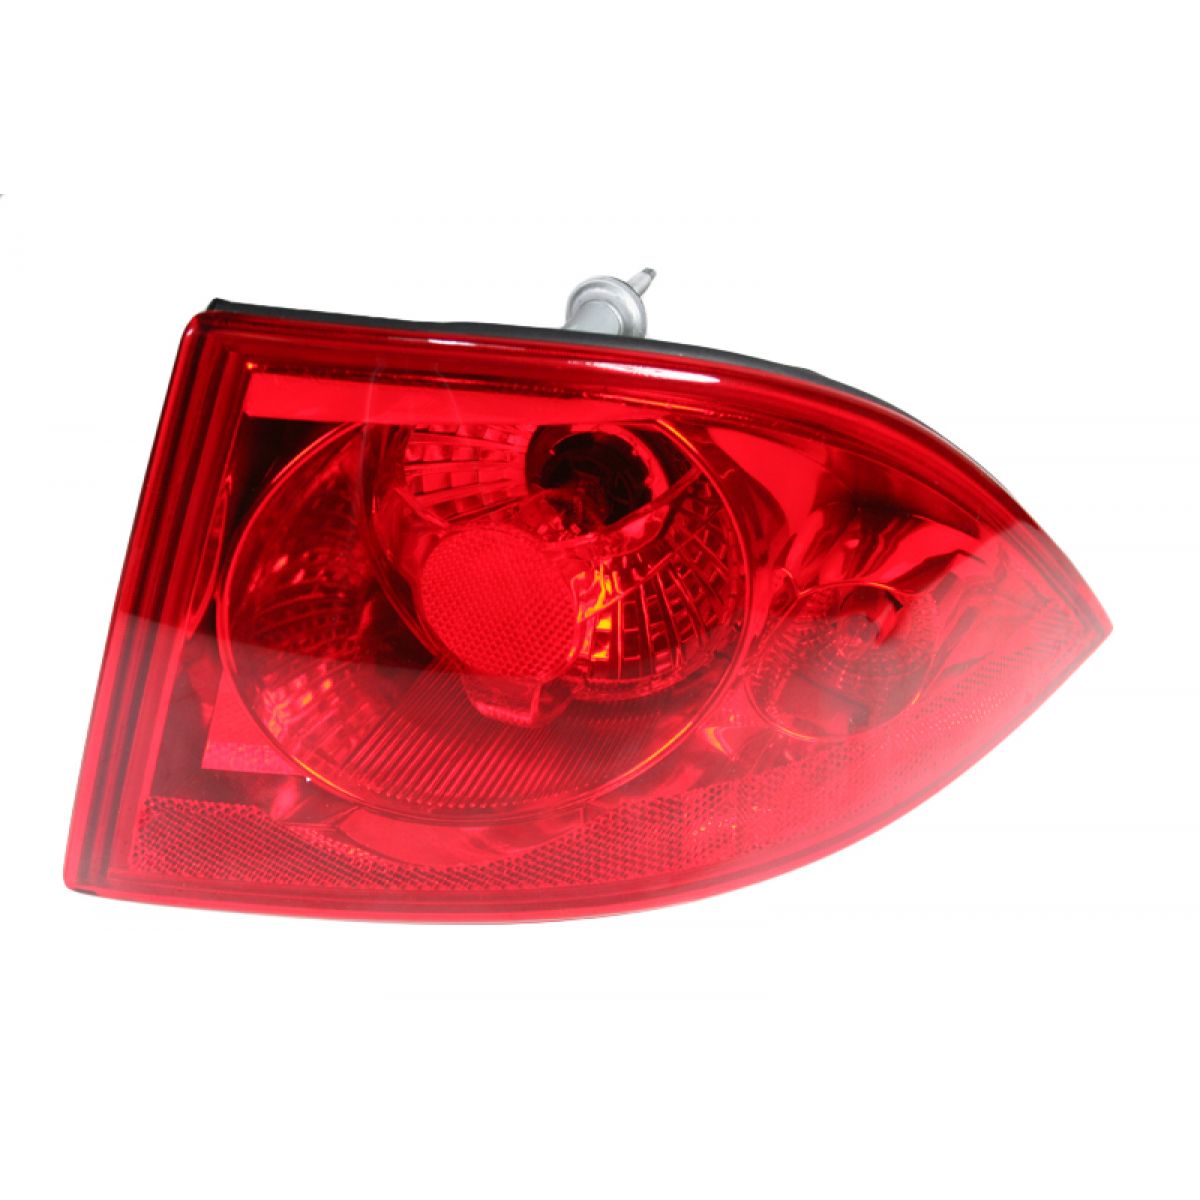 2009 Buick Lucerne Brake Light Bulb Replacement